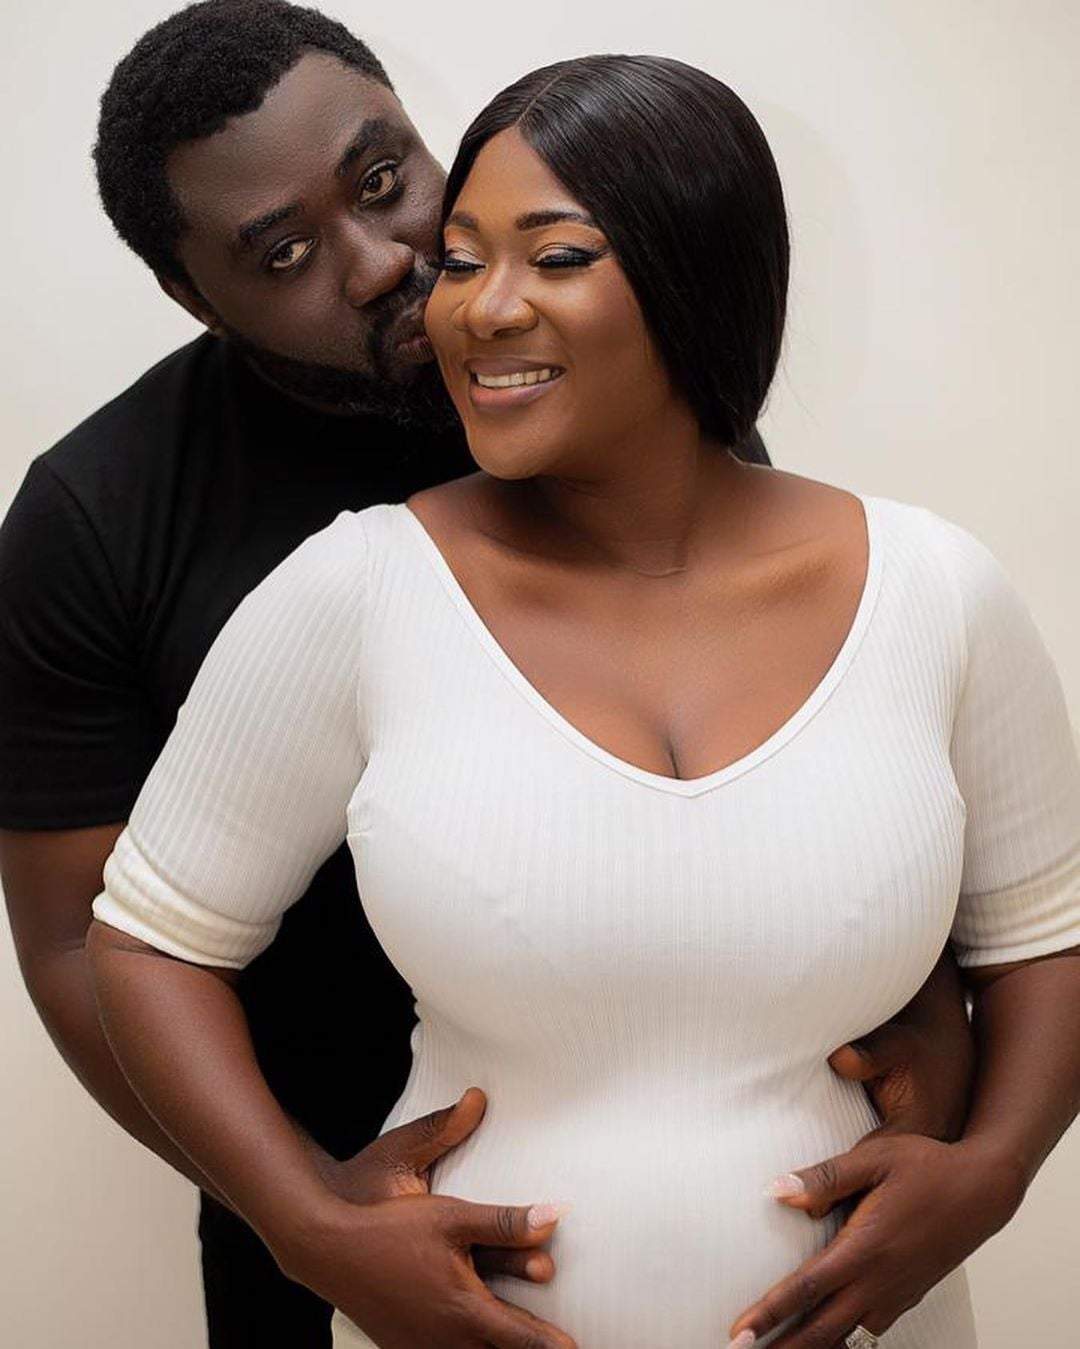 Pregnant Mercy Johnson Participates In Viral TikTok Challenge With Her Family (Video)